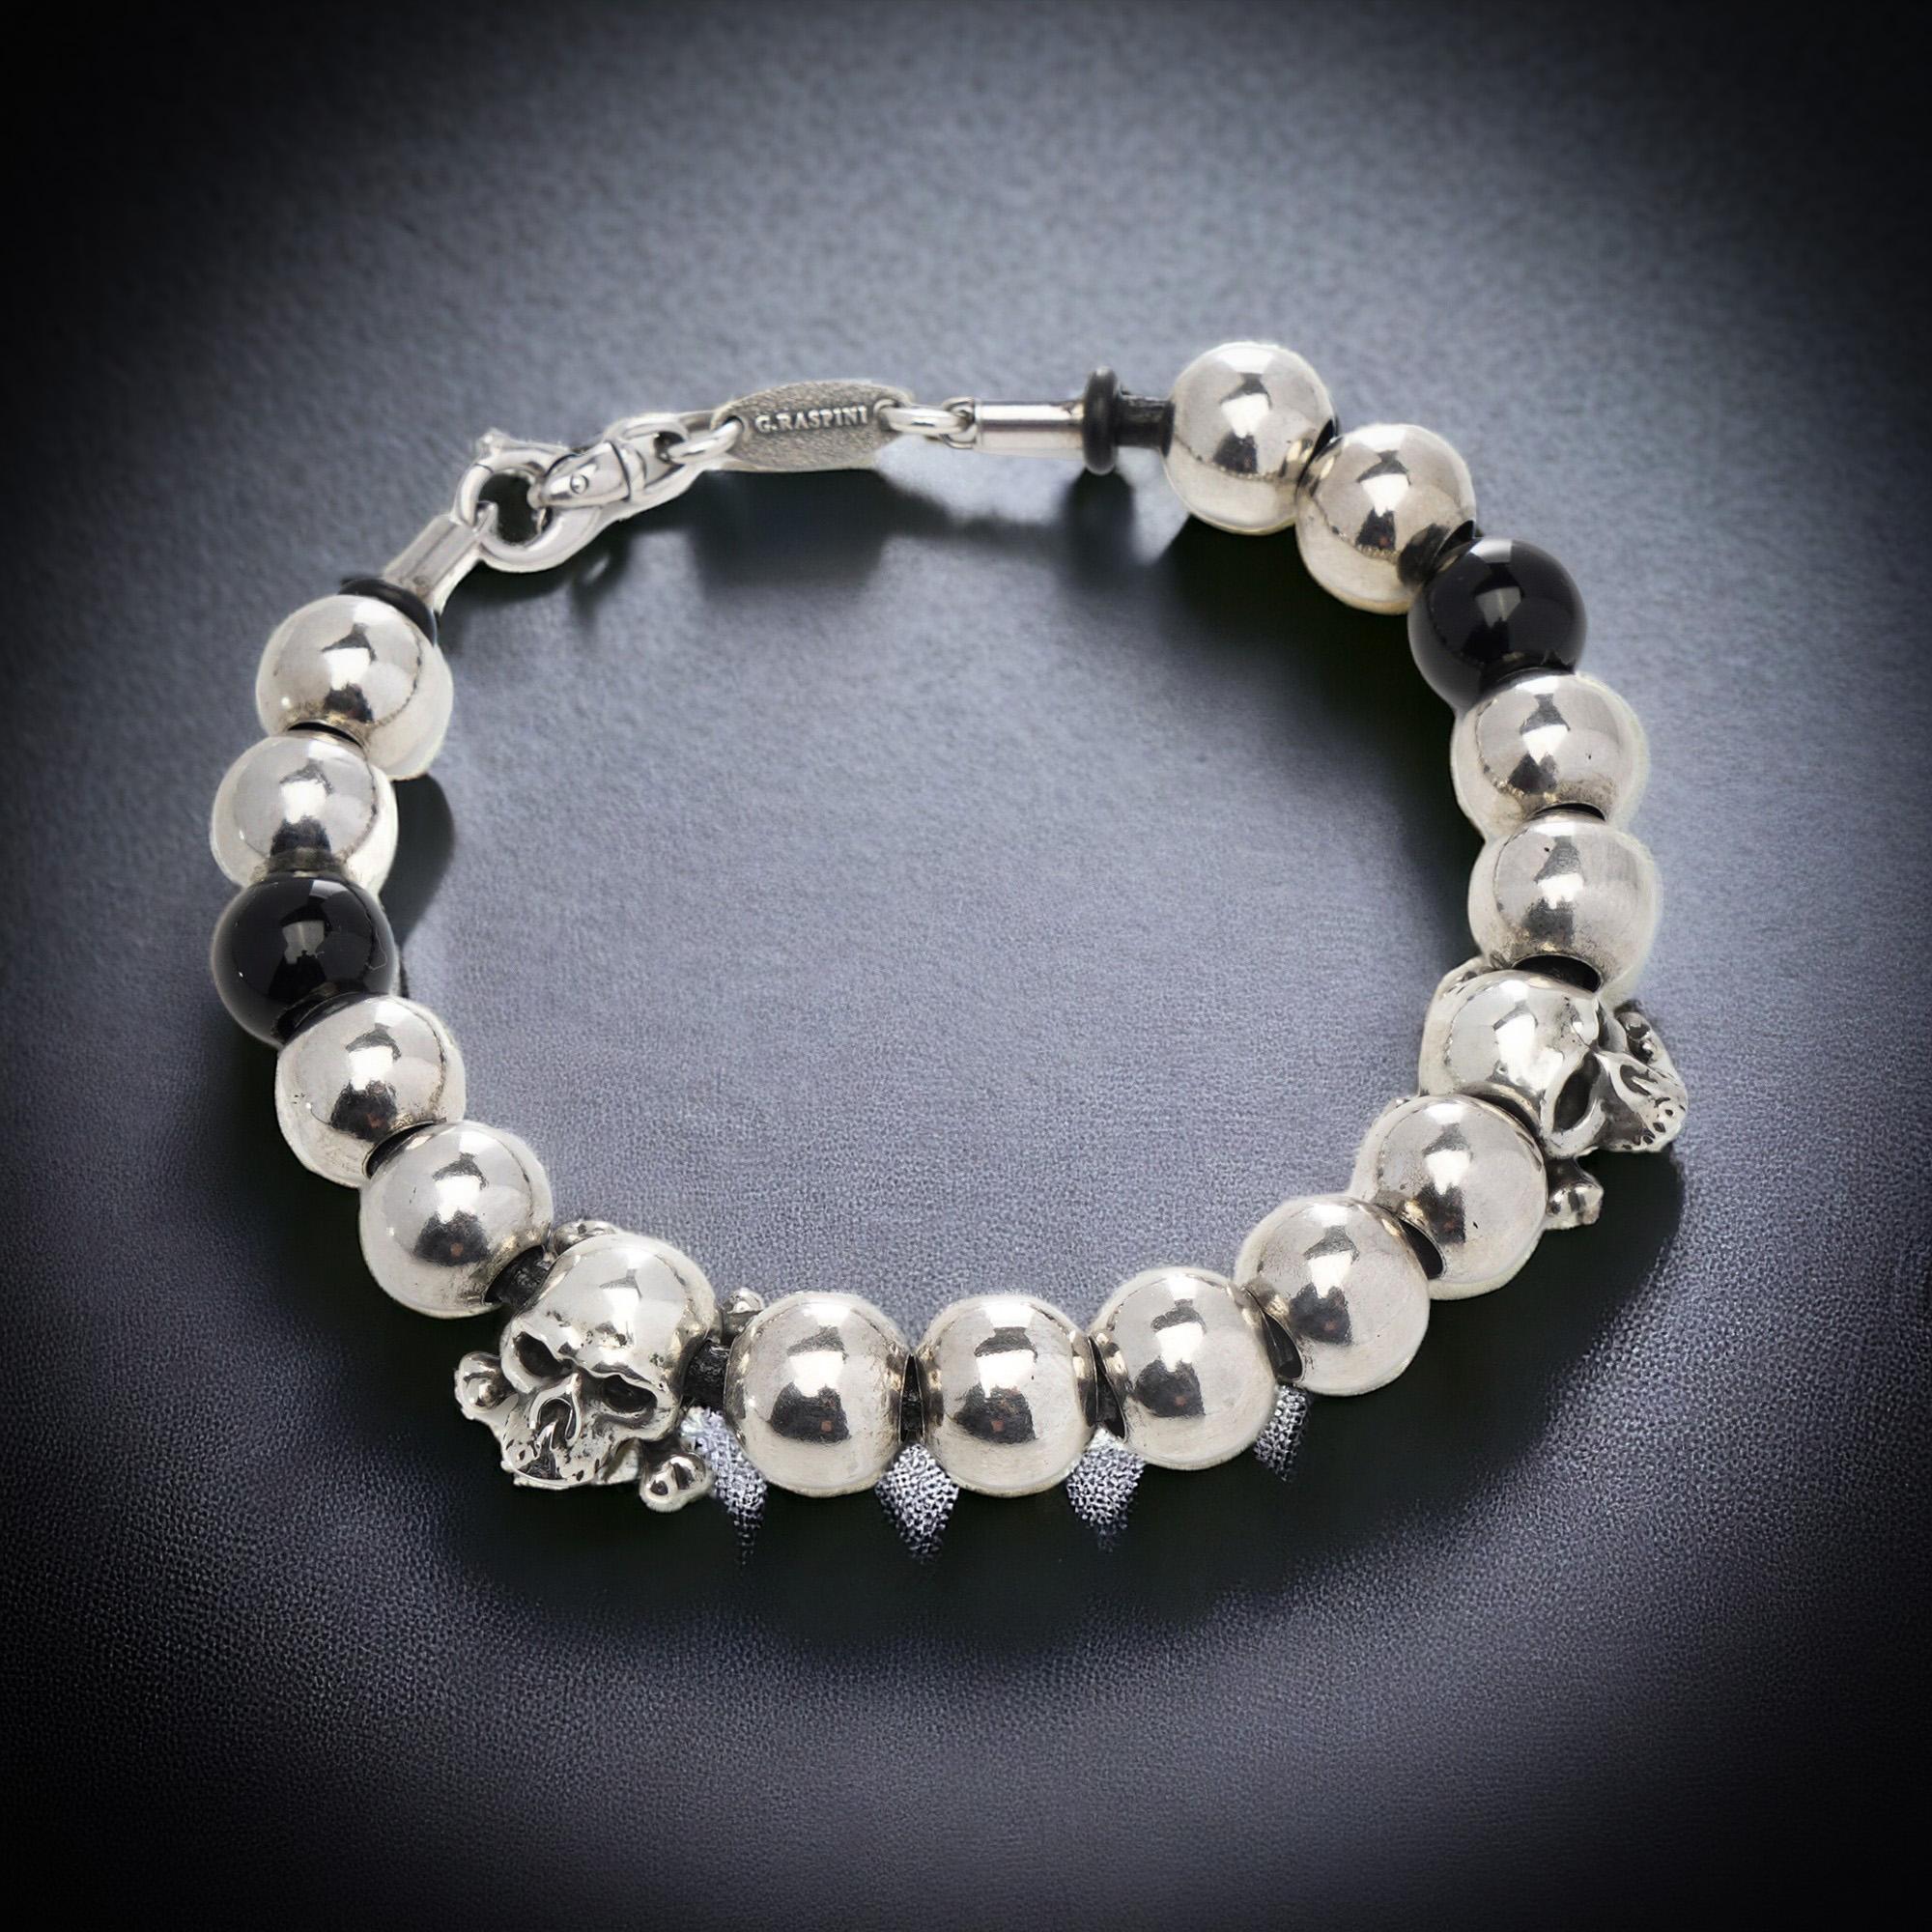 Giovani Raspini sterling 925 silver bead bracelet with skull accents and two onyx beads.
Made in Italy, Circa 1990's
Hallmarked with 925 silver mark, Italian hallmarks and Giovani Raspini mark.

Dimensions:
Length x width x 22 x 1.7 cm
Weight: 32